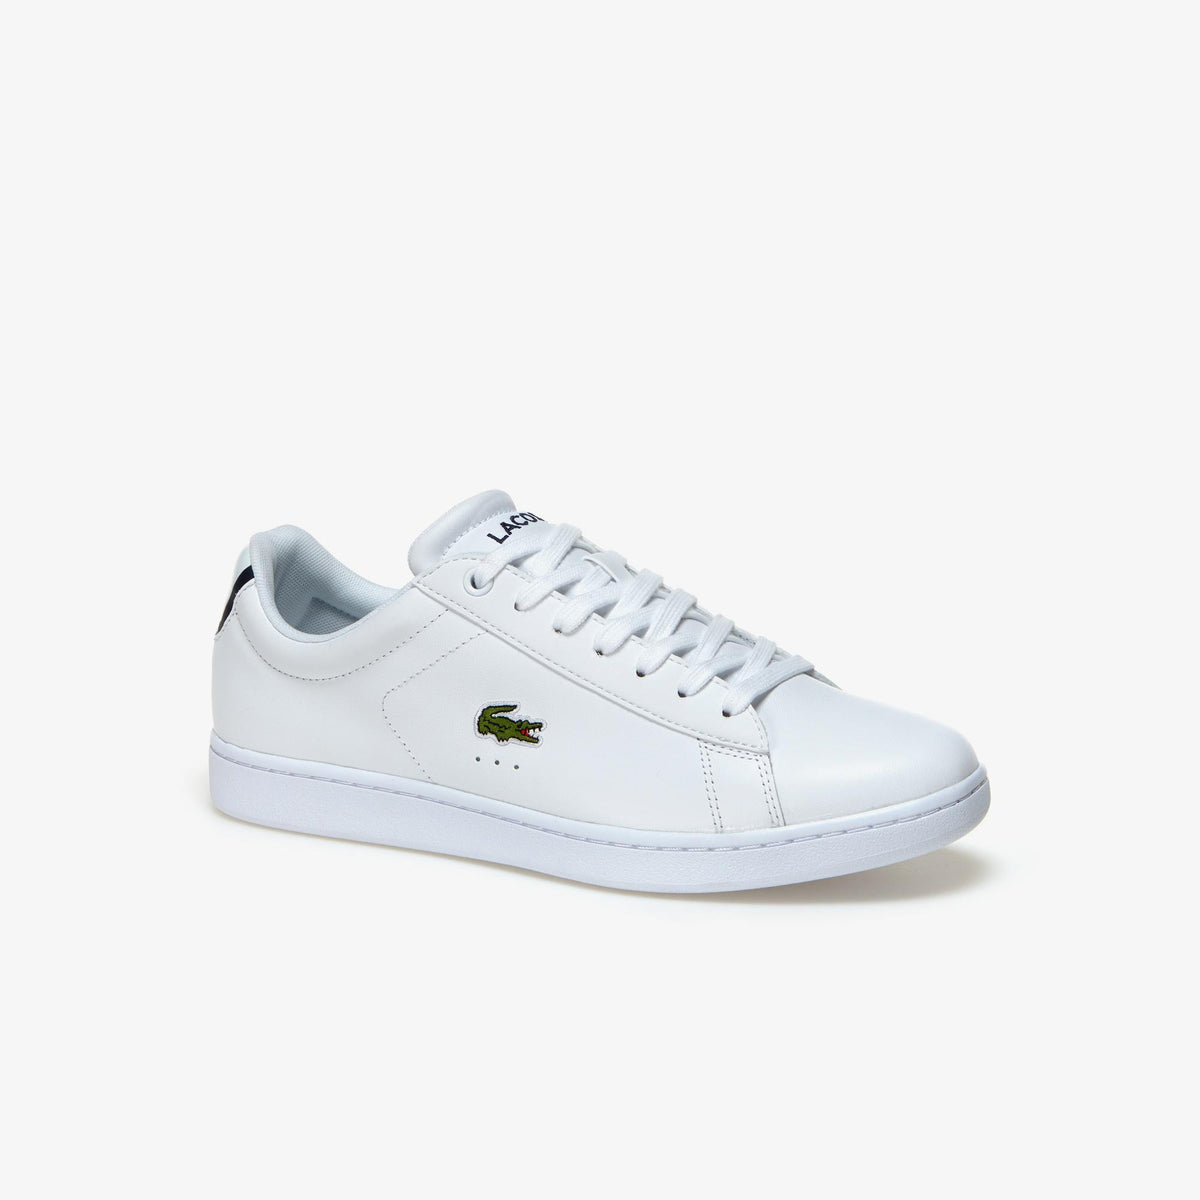 Carnaby Evo BL 1 Men's Leather Sneakers White